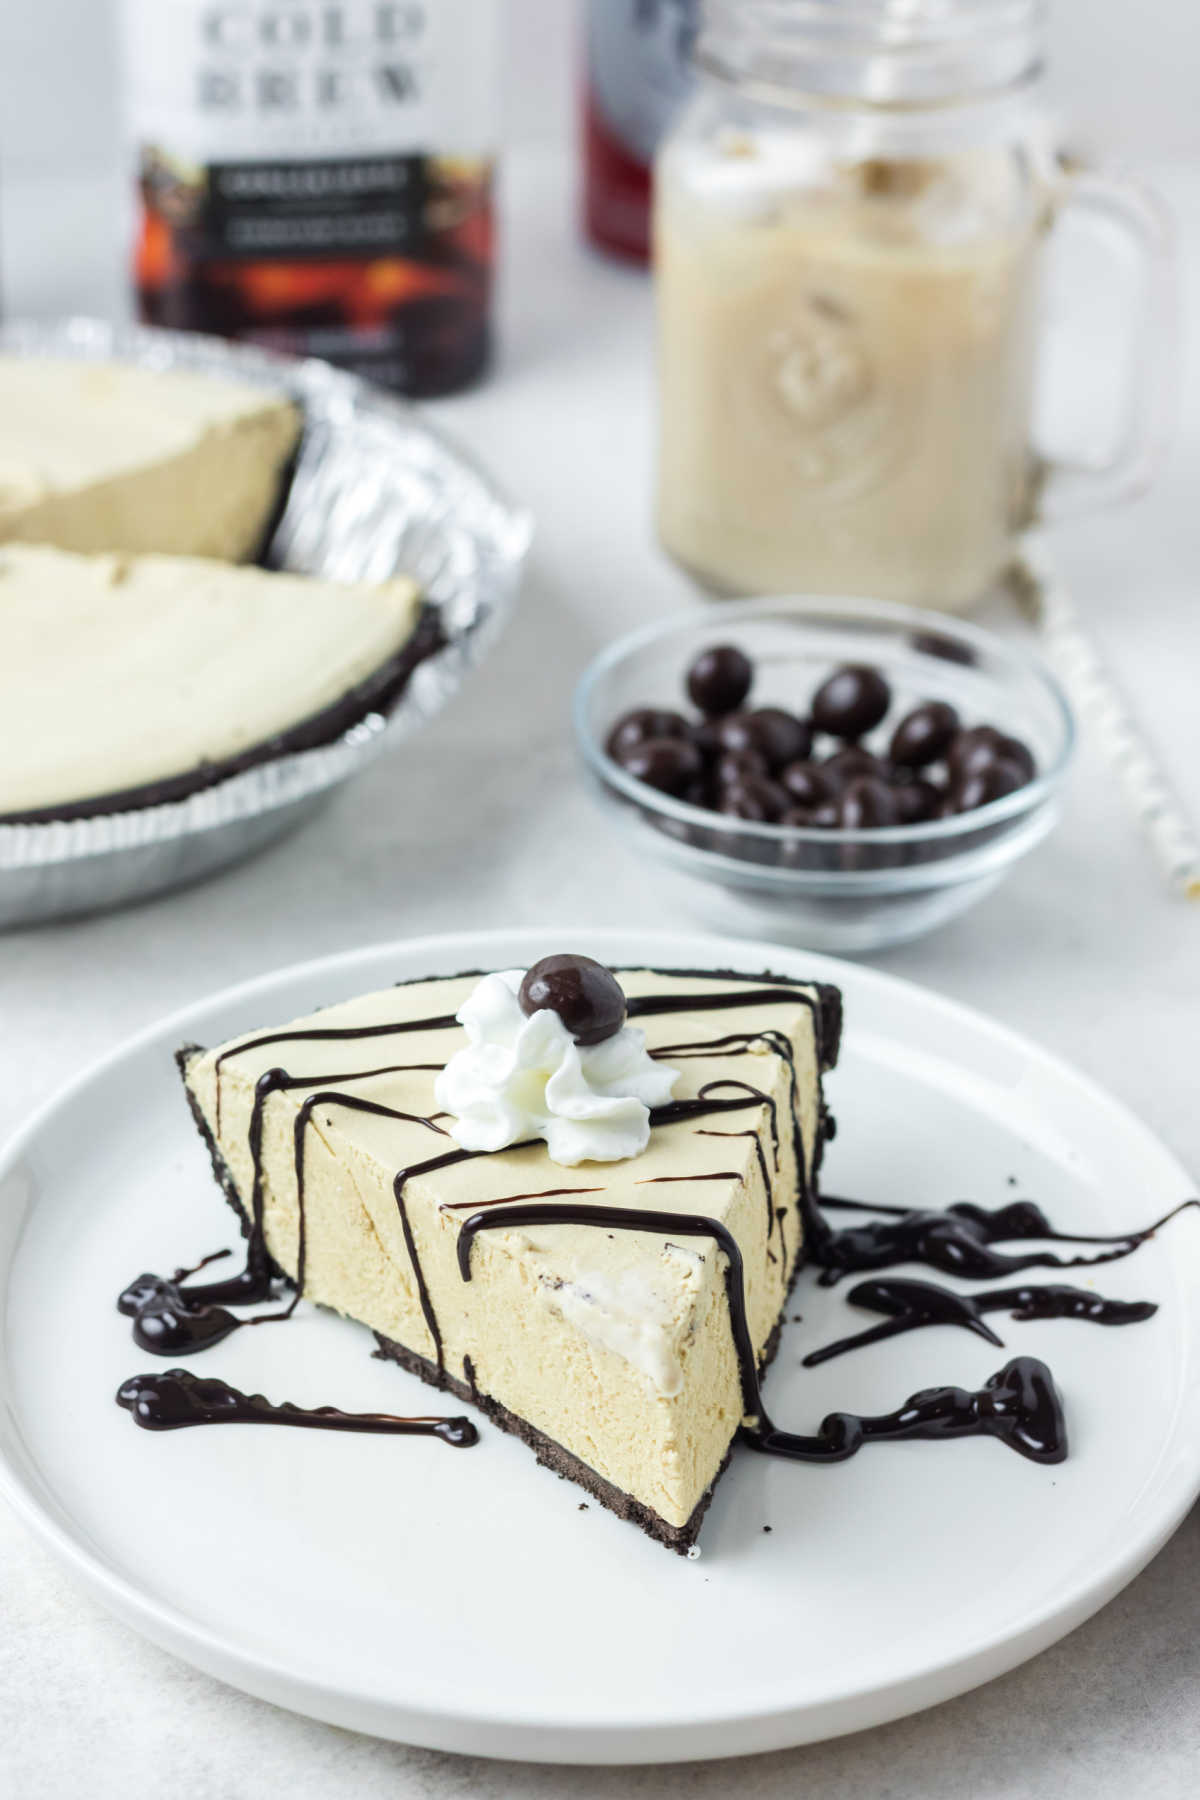 Slice of frozen coffee pie drizzled with dark chocolate fudge sauce, ready to eat.